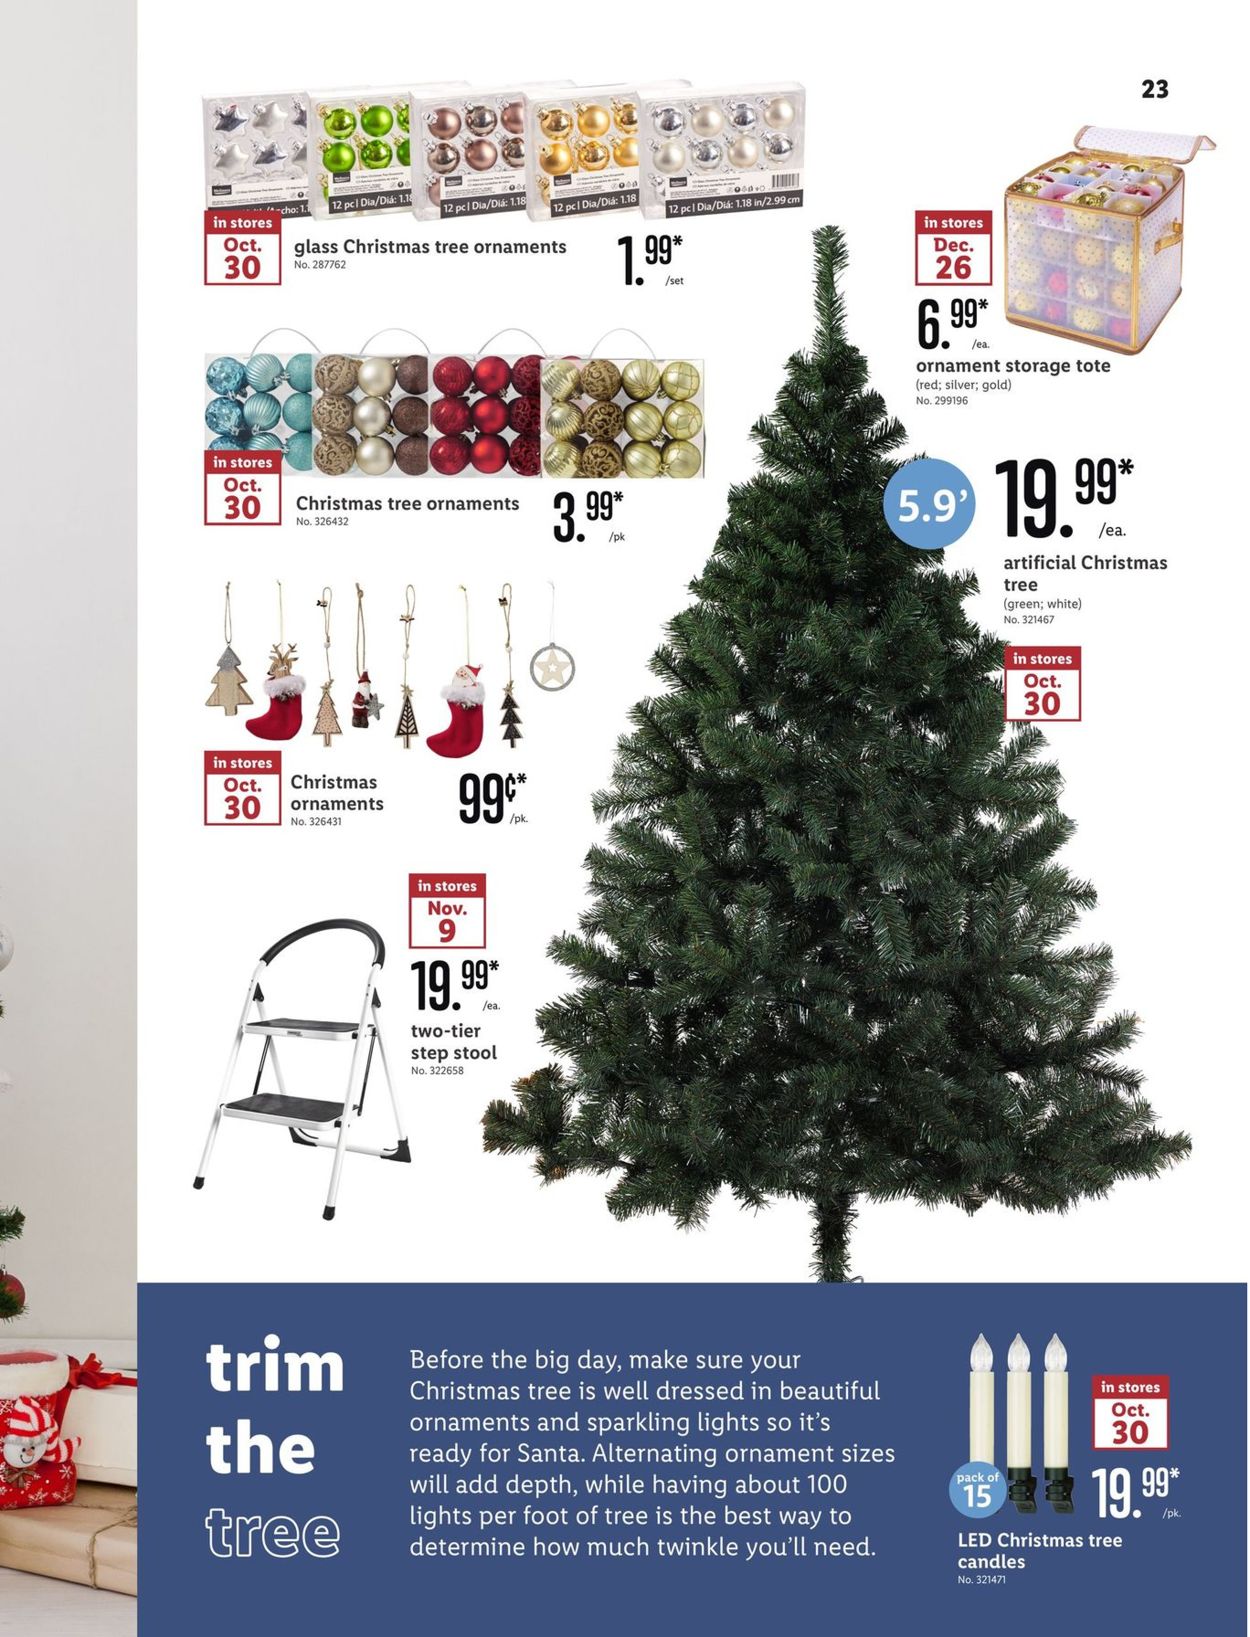 Lidl - Holidays Ad 2019 Current weekly ad 10/30 - 12/31/2019 [23 ...